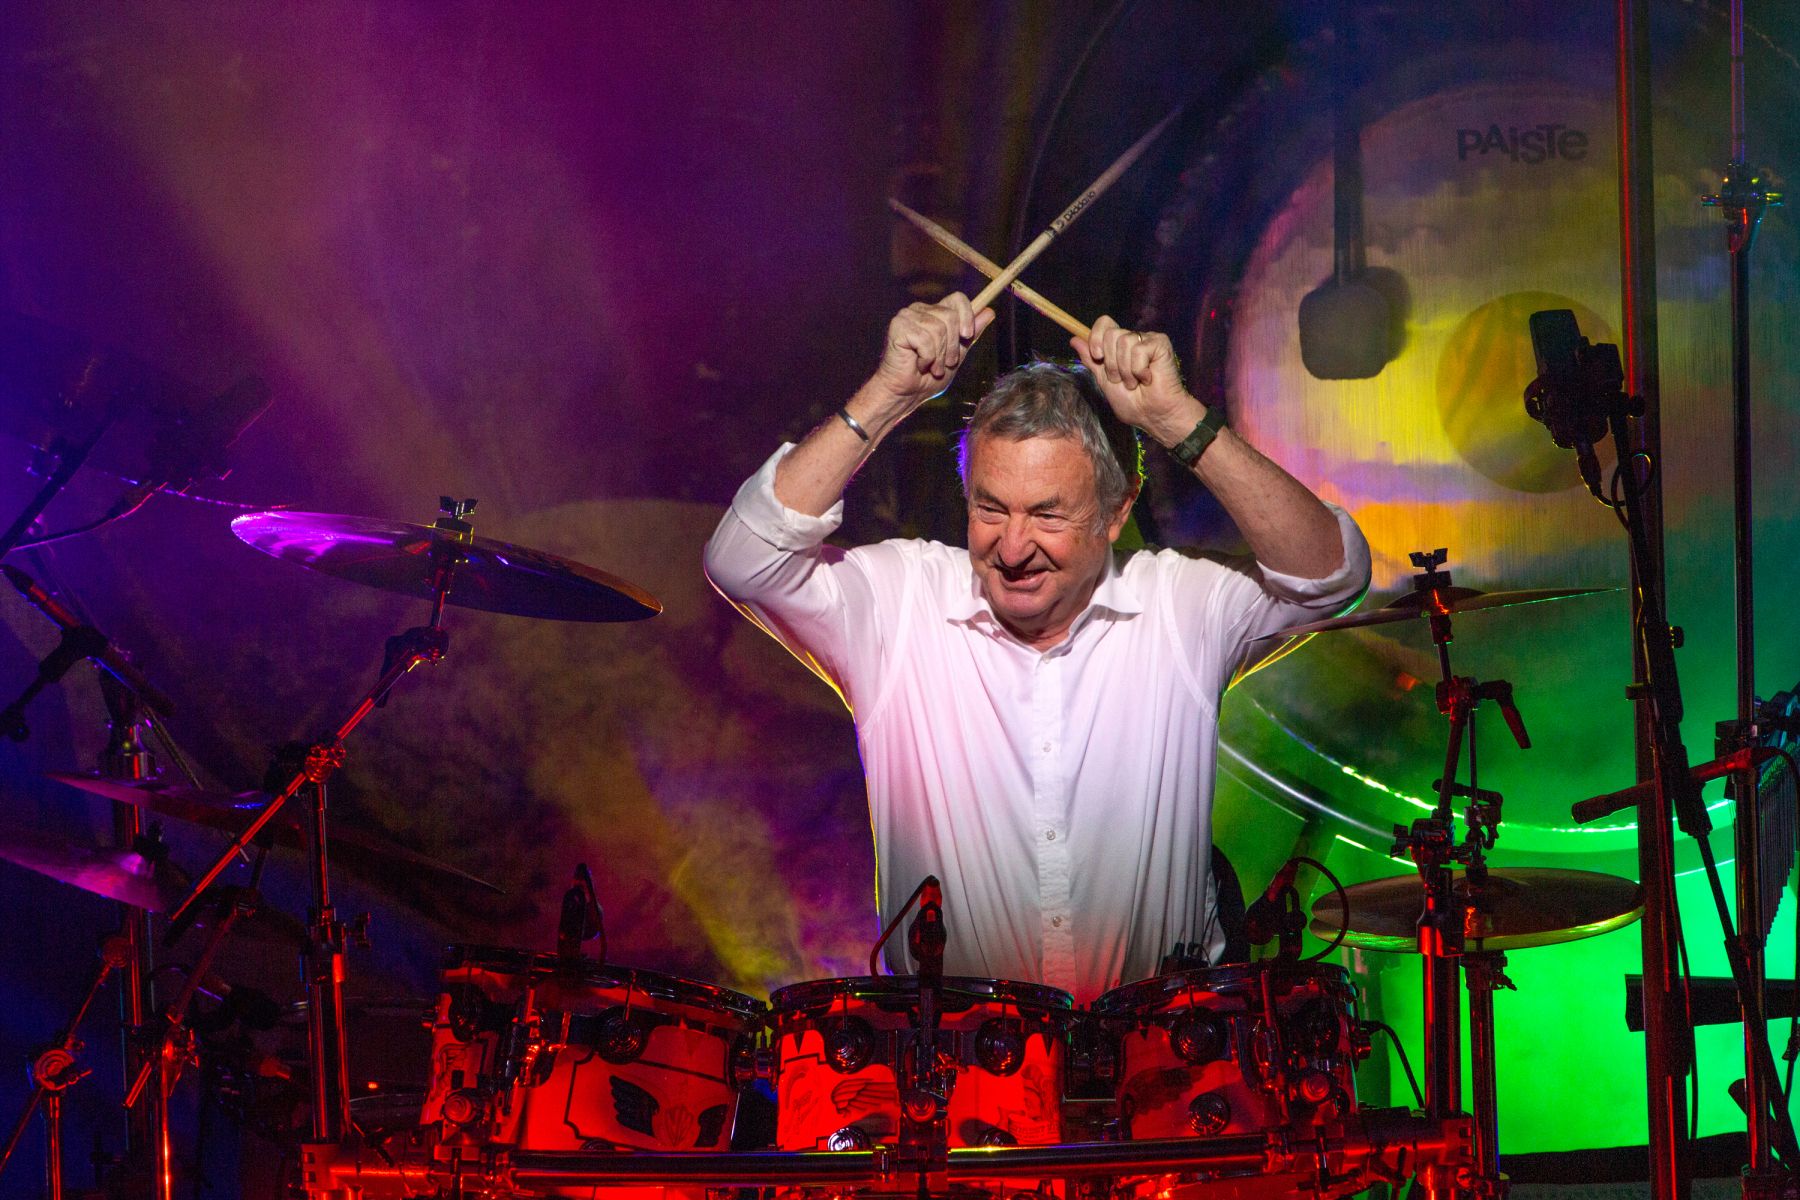 Nick Mason, drums, darkness lit by stage lights